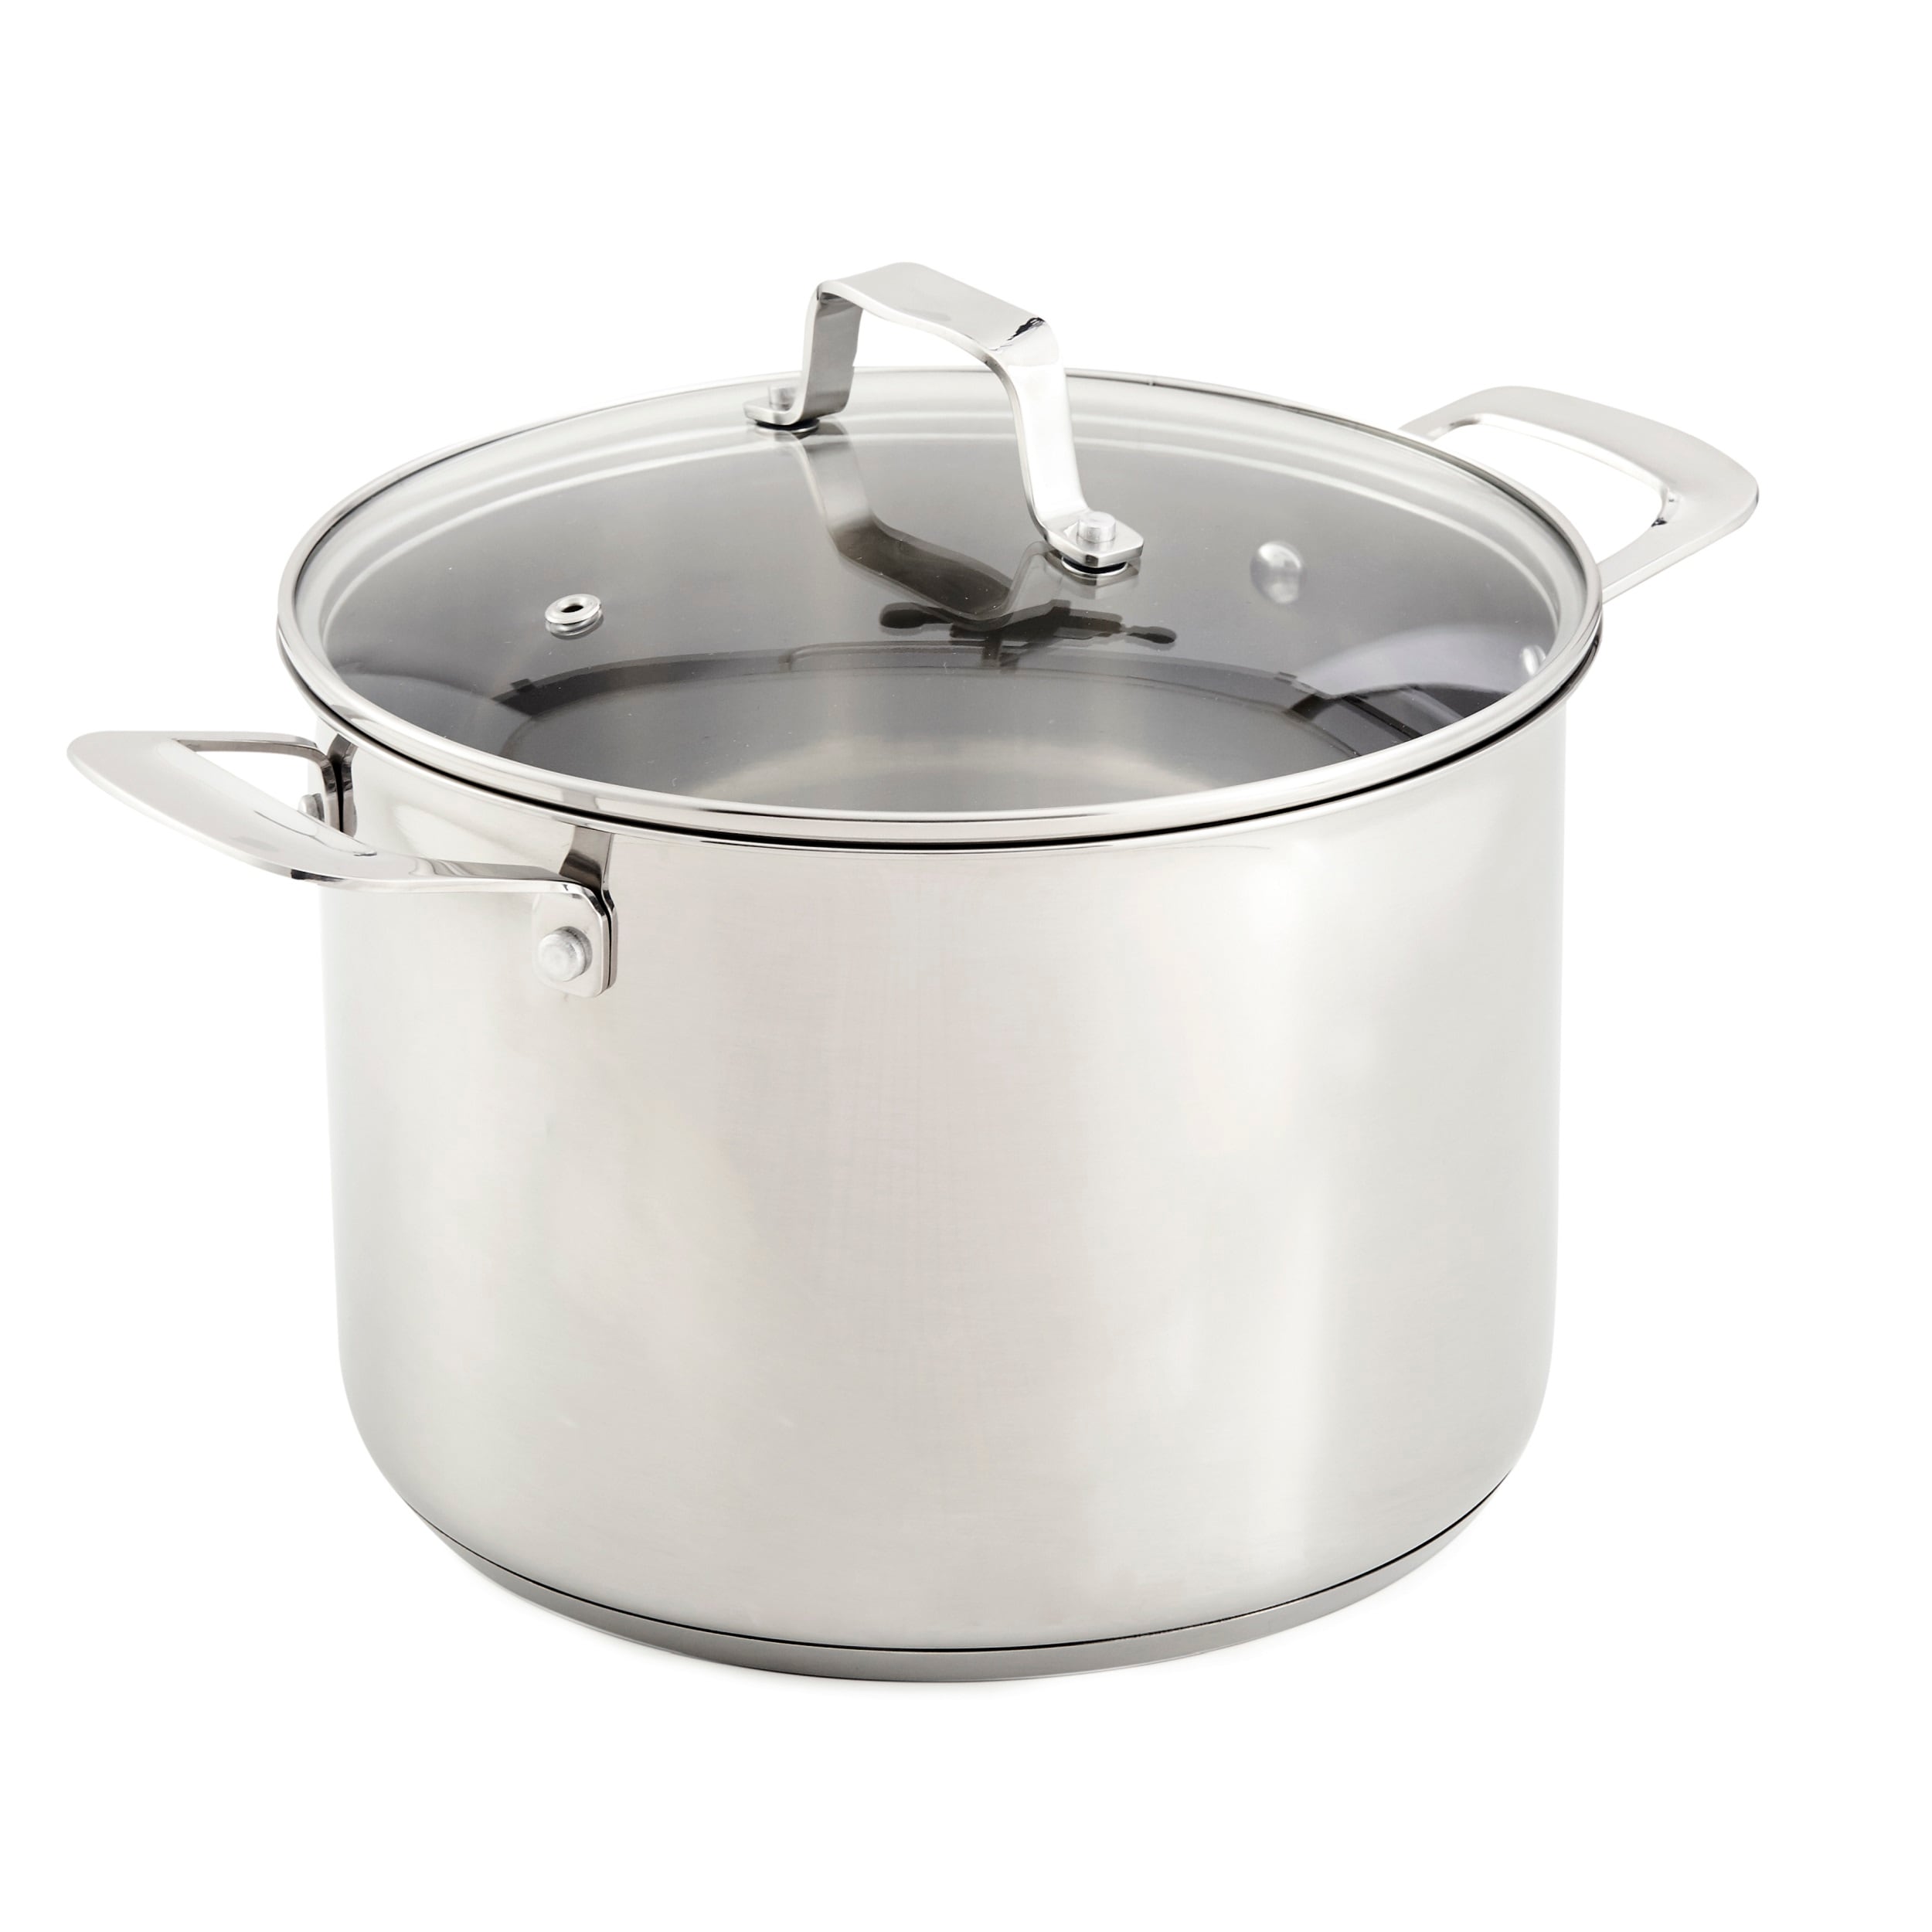 Davyline Cookware 3-Layer Base 8-Quart Stainless Steel Stock Pot